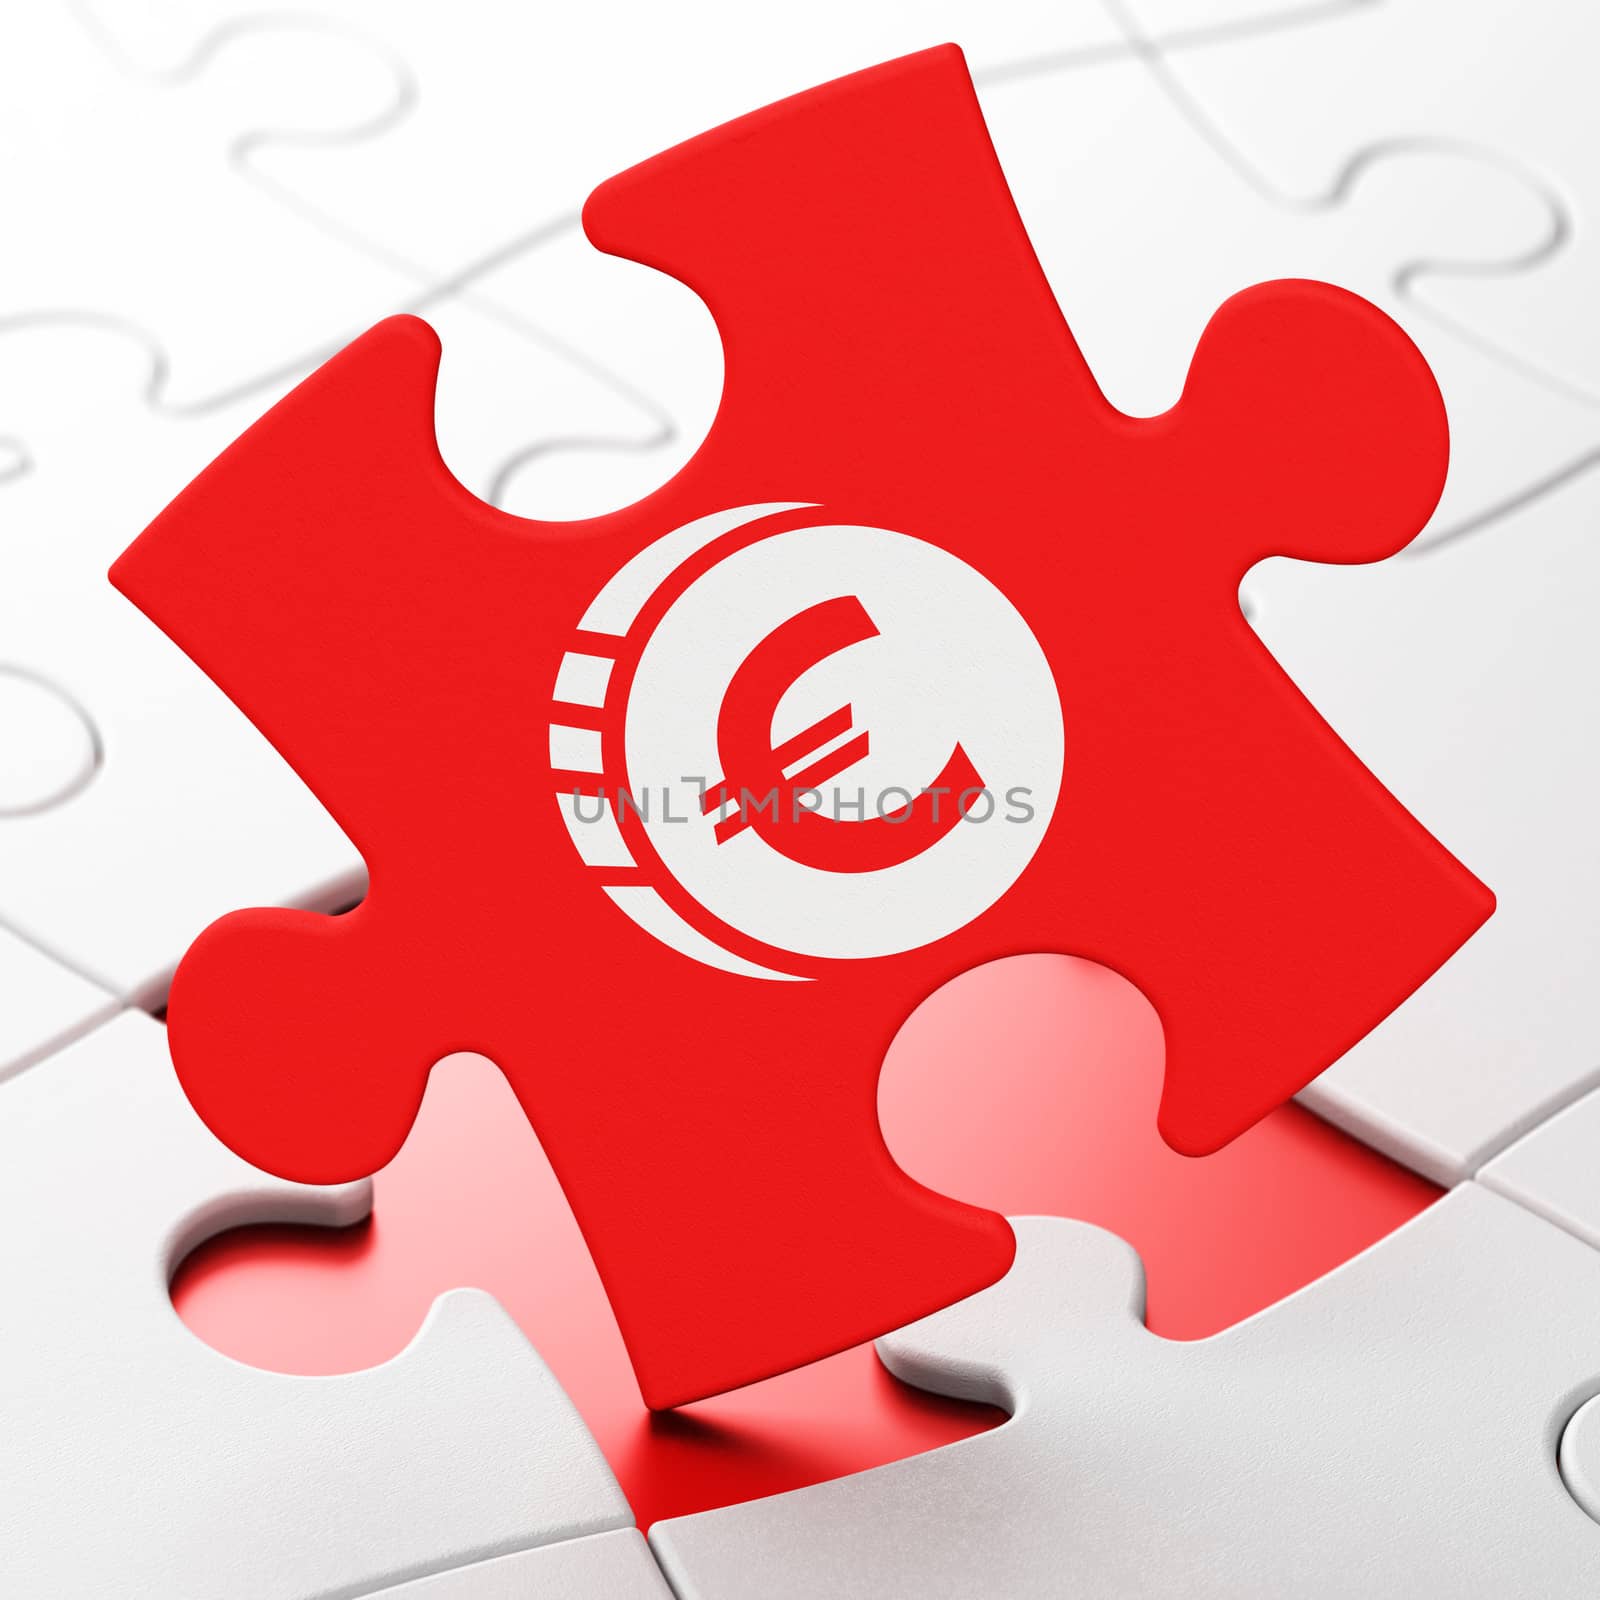 Money concept: Euro Coin on Red puzzle pieces background, 3d render